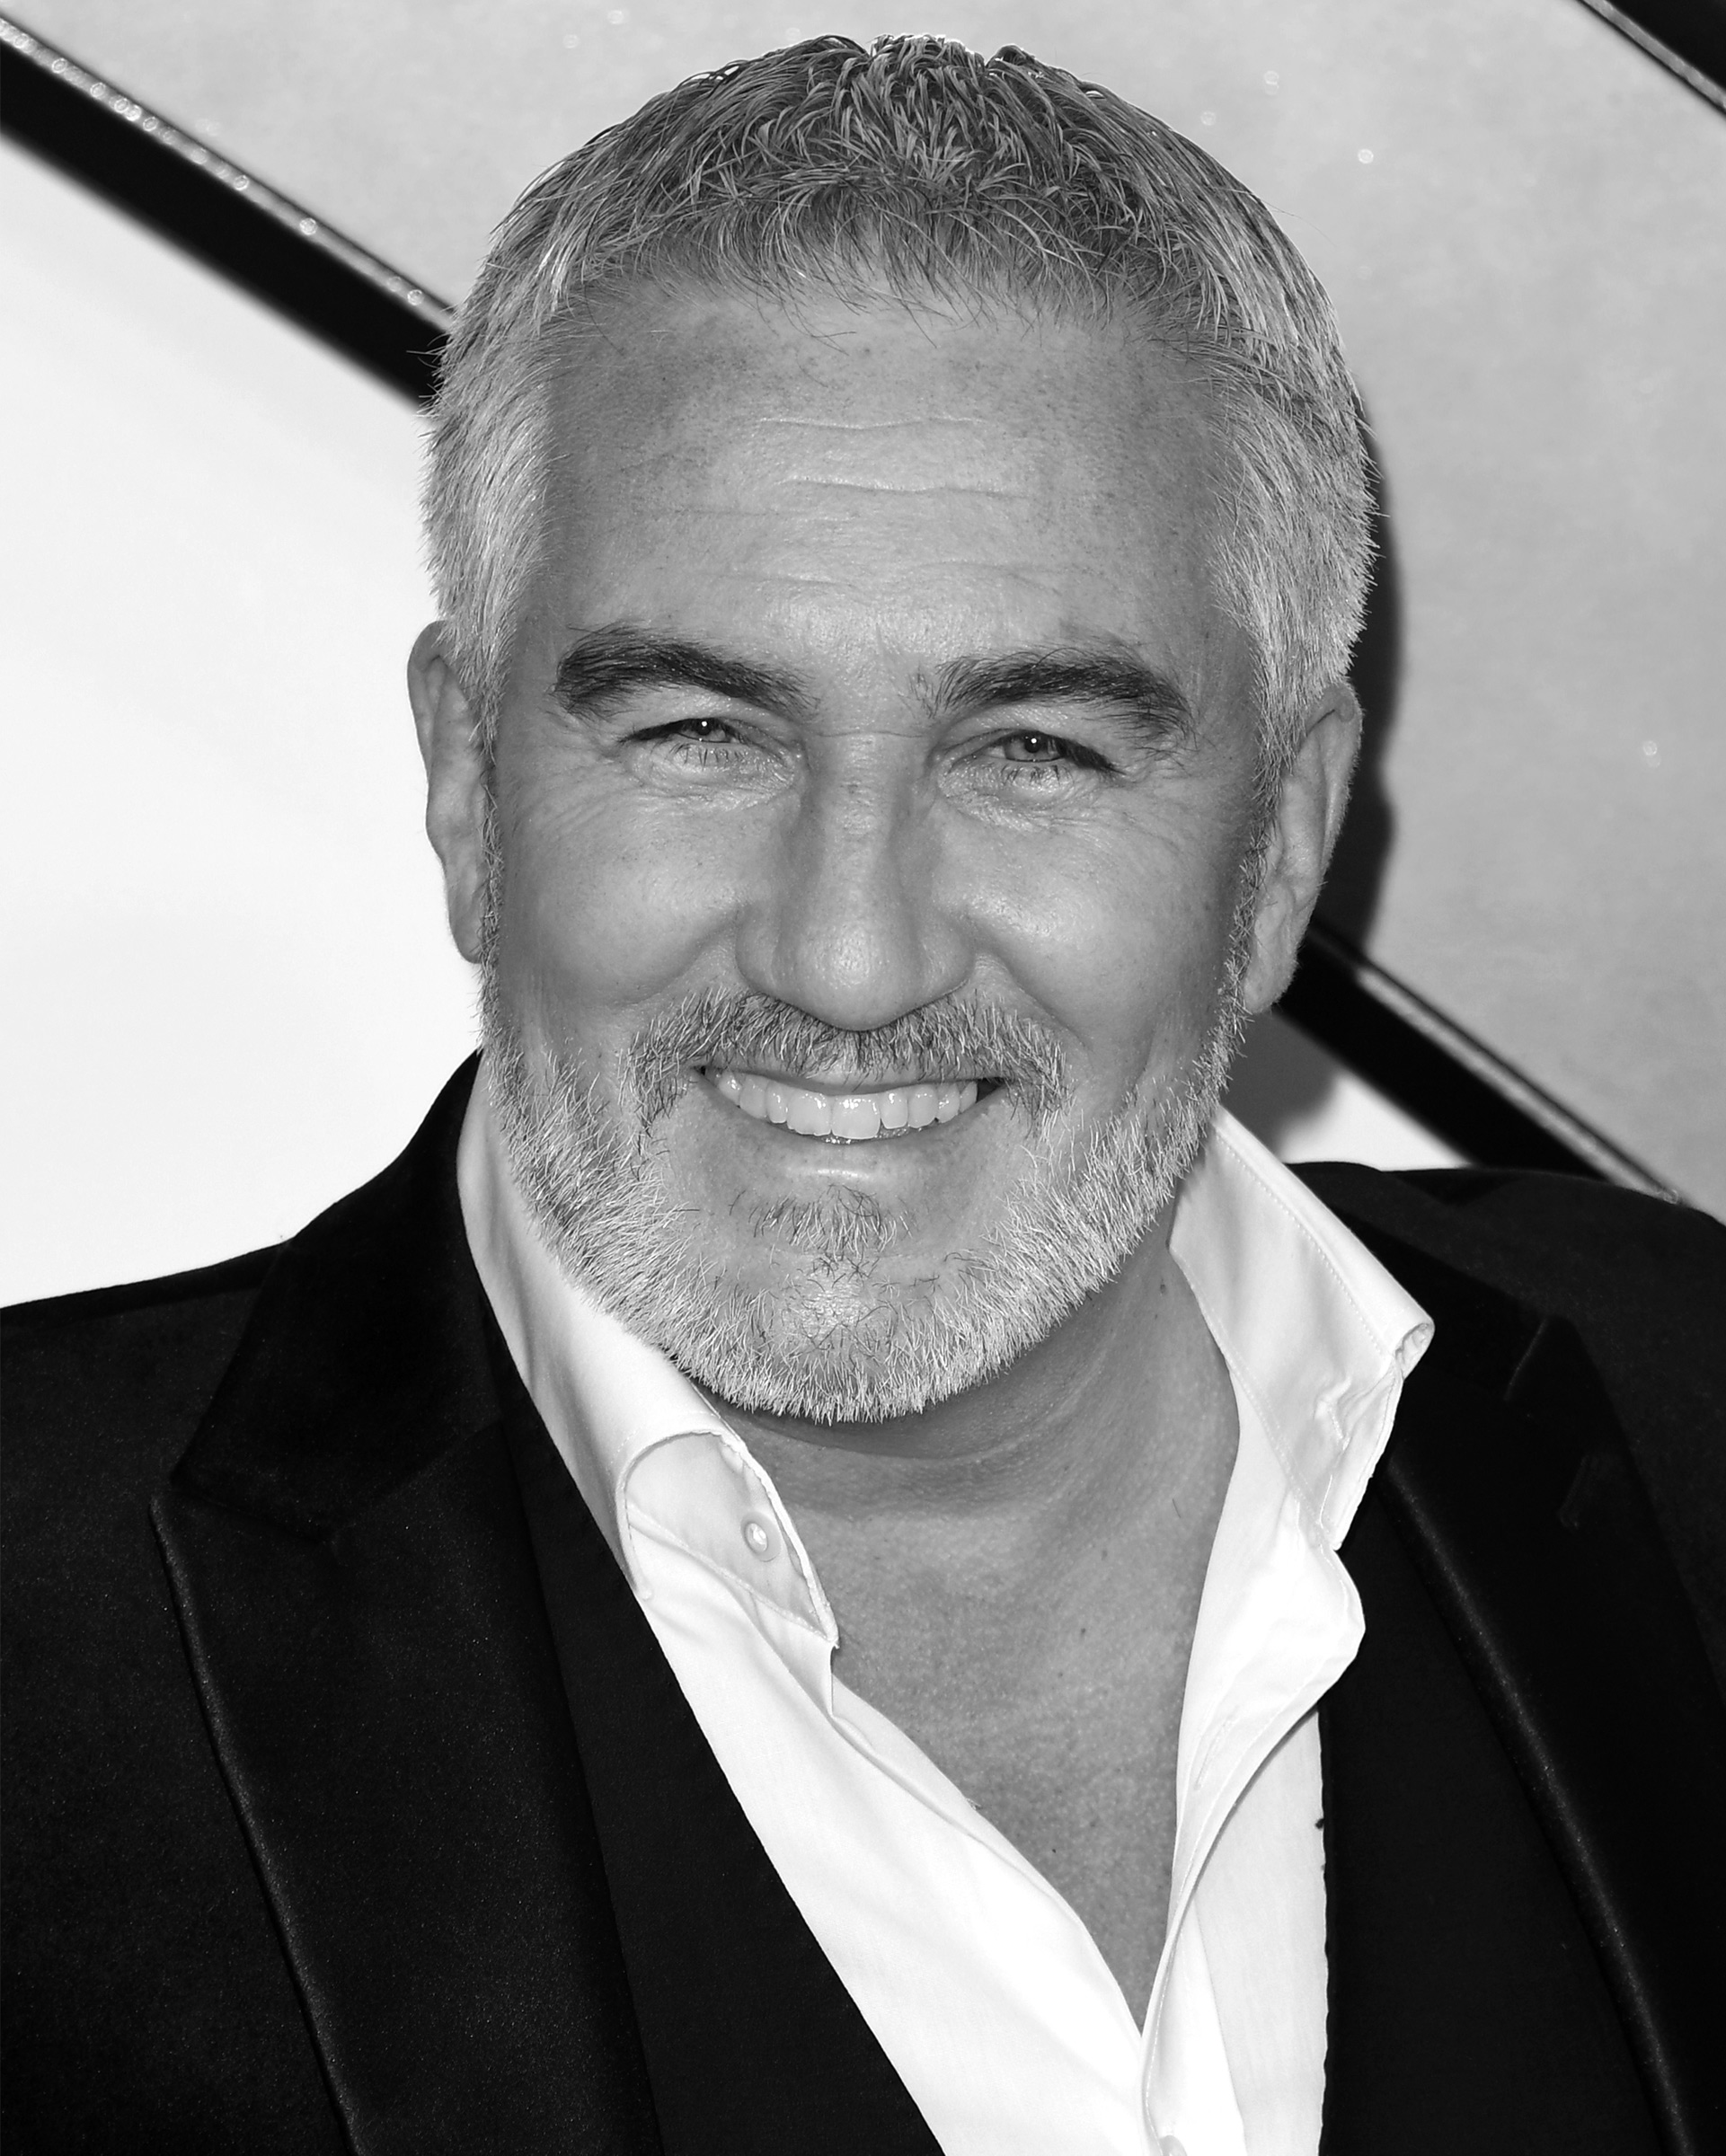 Paul Hollywood attends the World Premiere of 